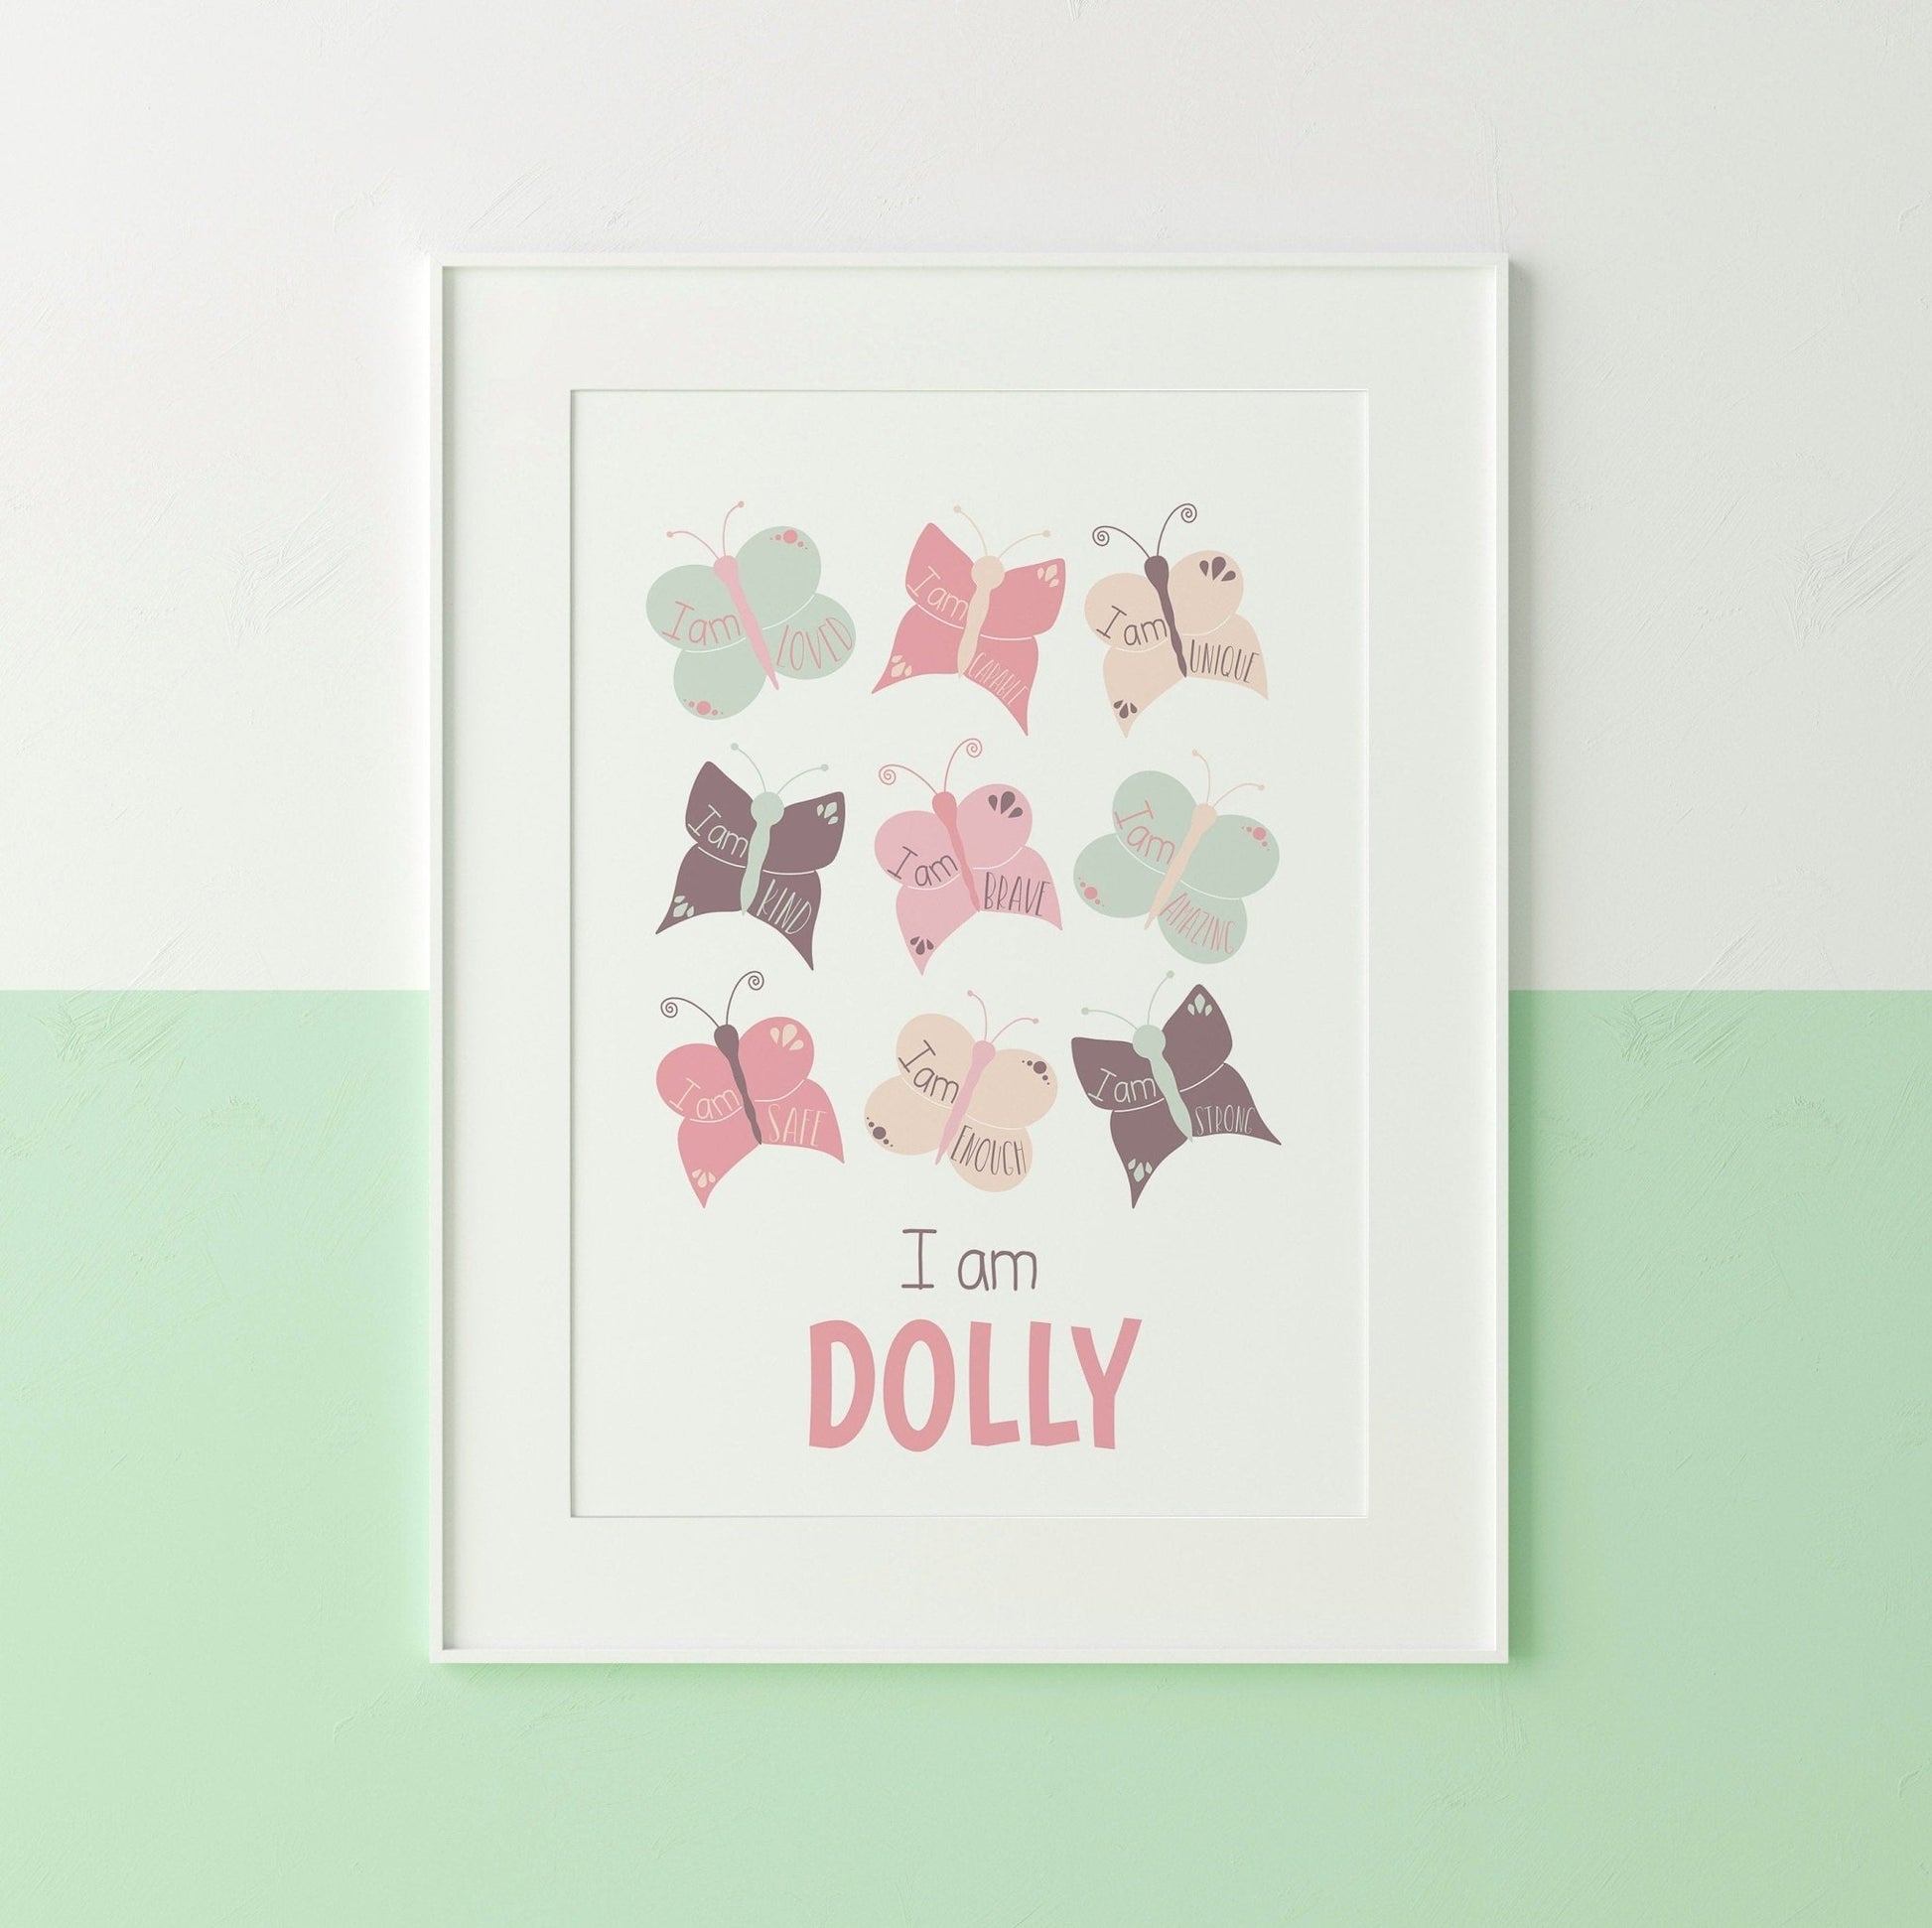 Butterfly affirmation nursery print - Dolly and Fred Designs